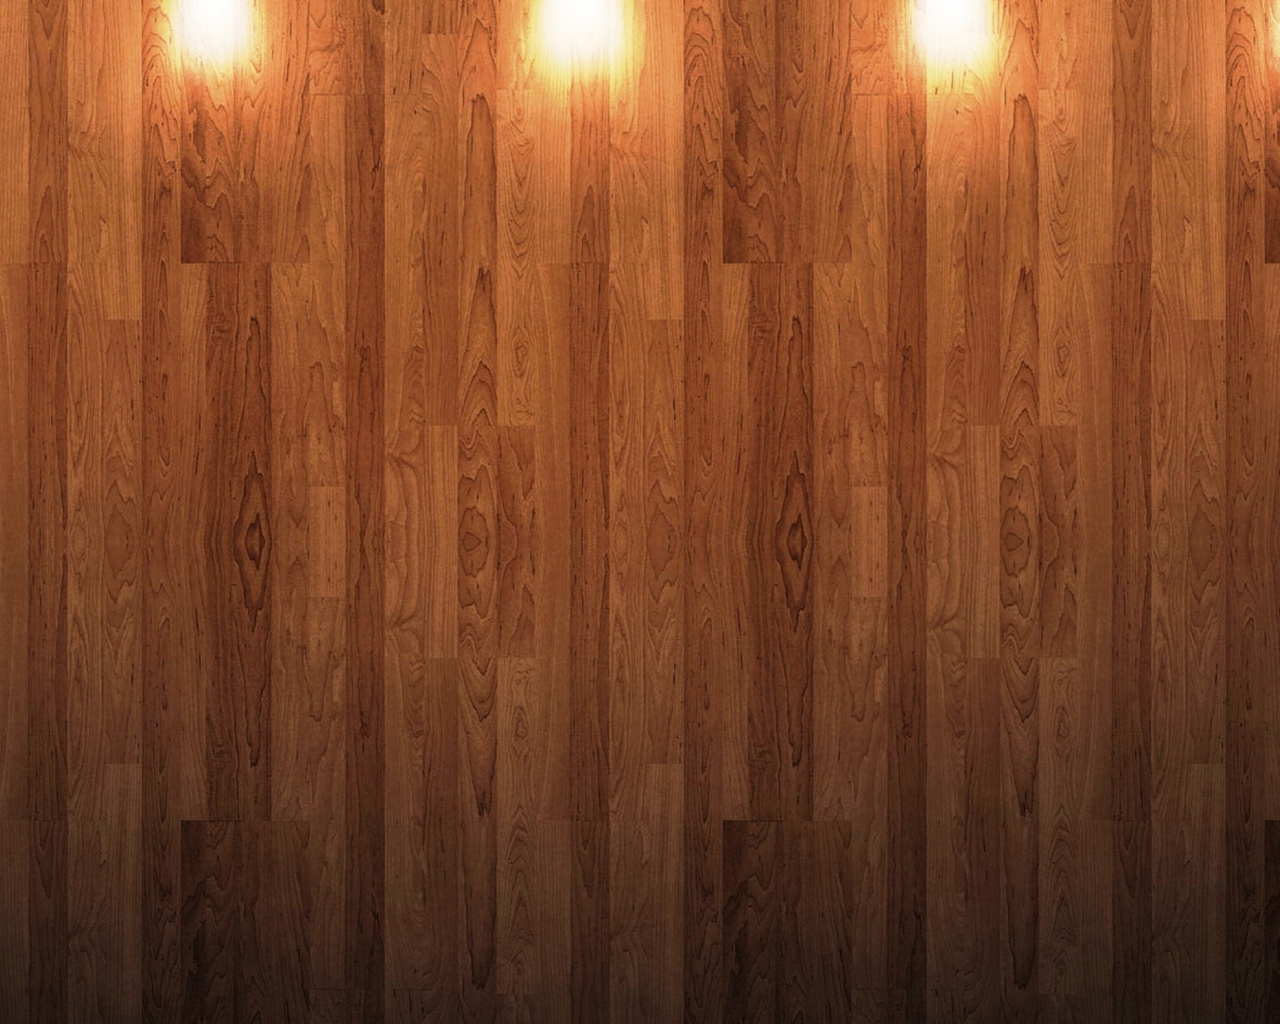 Das Simple and Beautifull Wood Texture Wallpaper 1280x1024